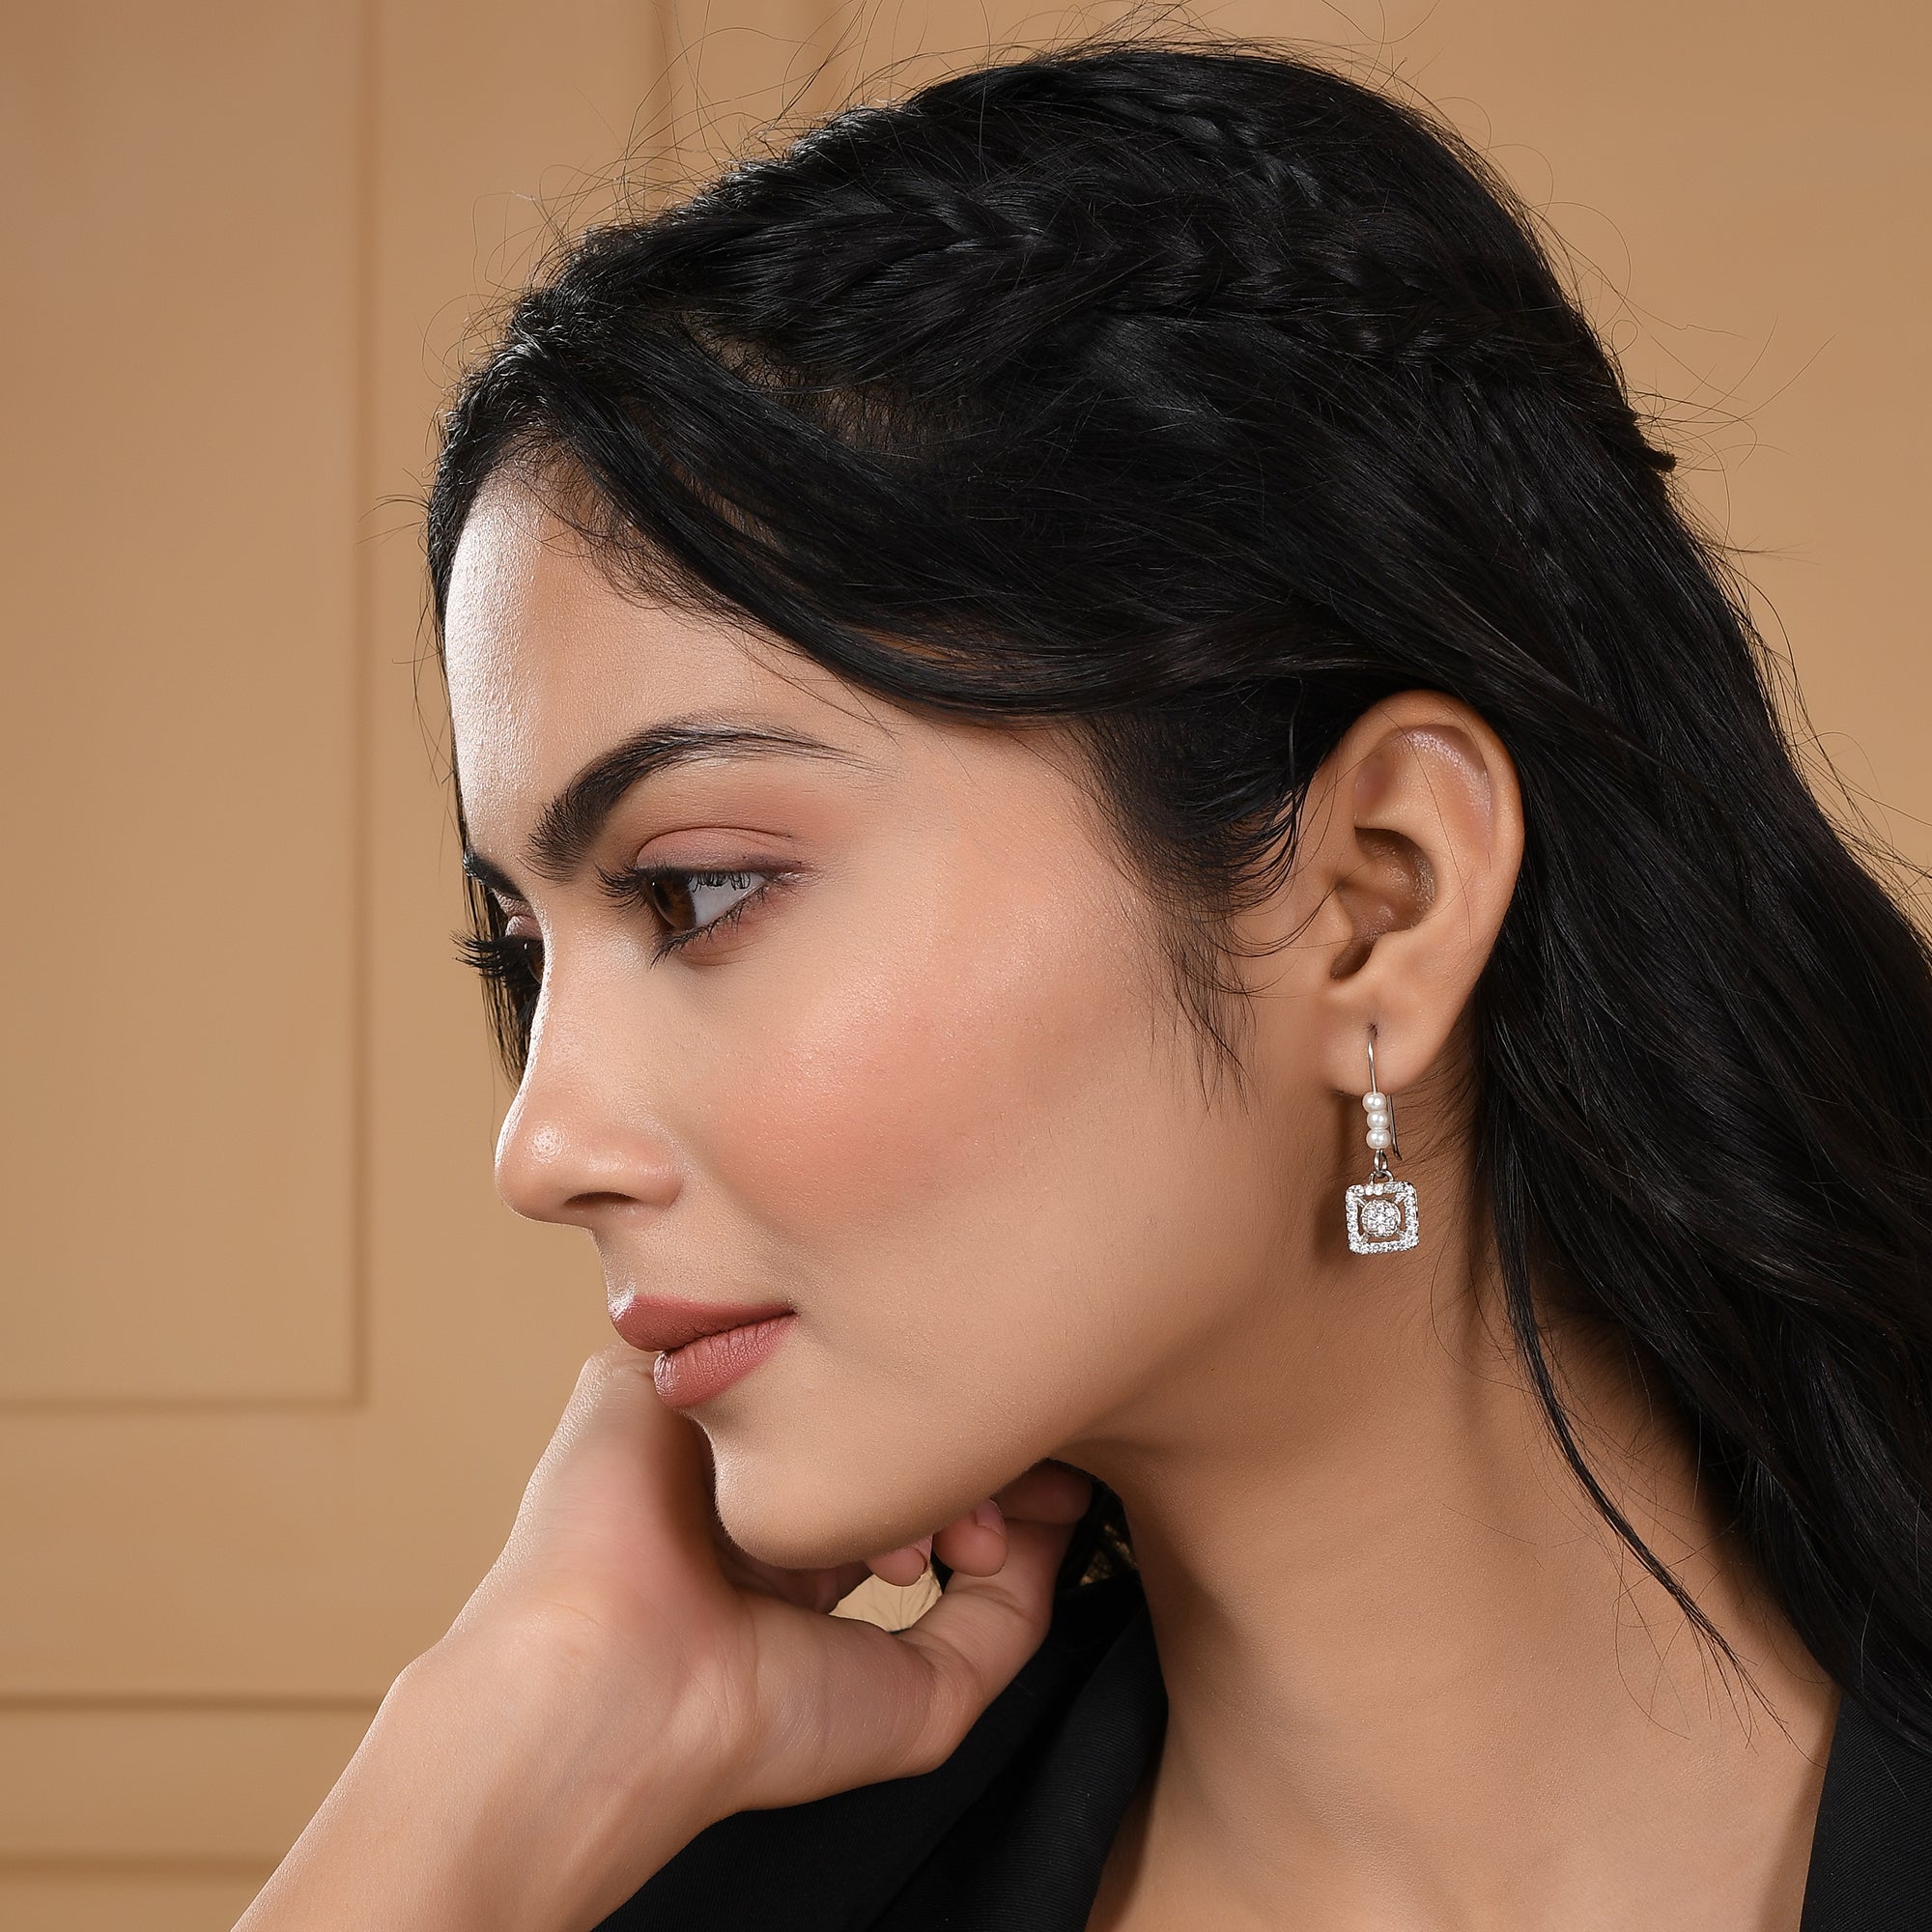 Silver Plated Stylish Cz Earrings